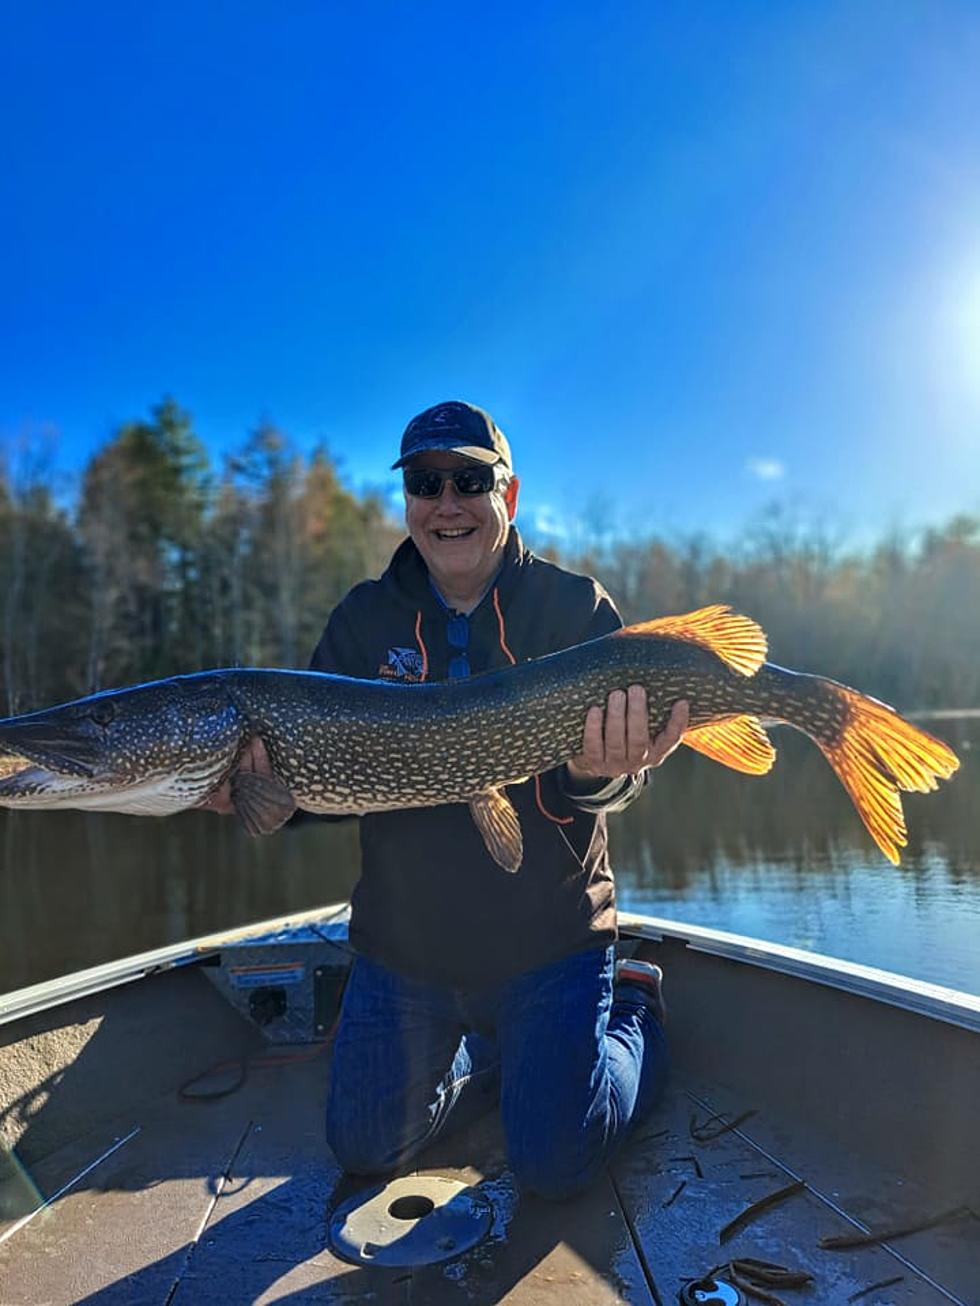 Enormous River Monster Pulled in Maine